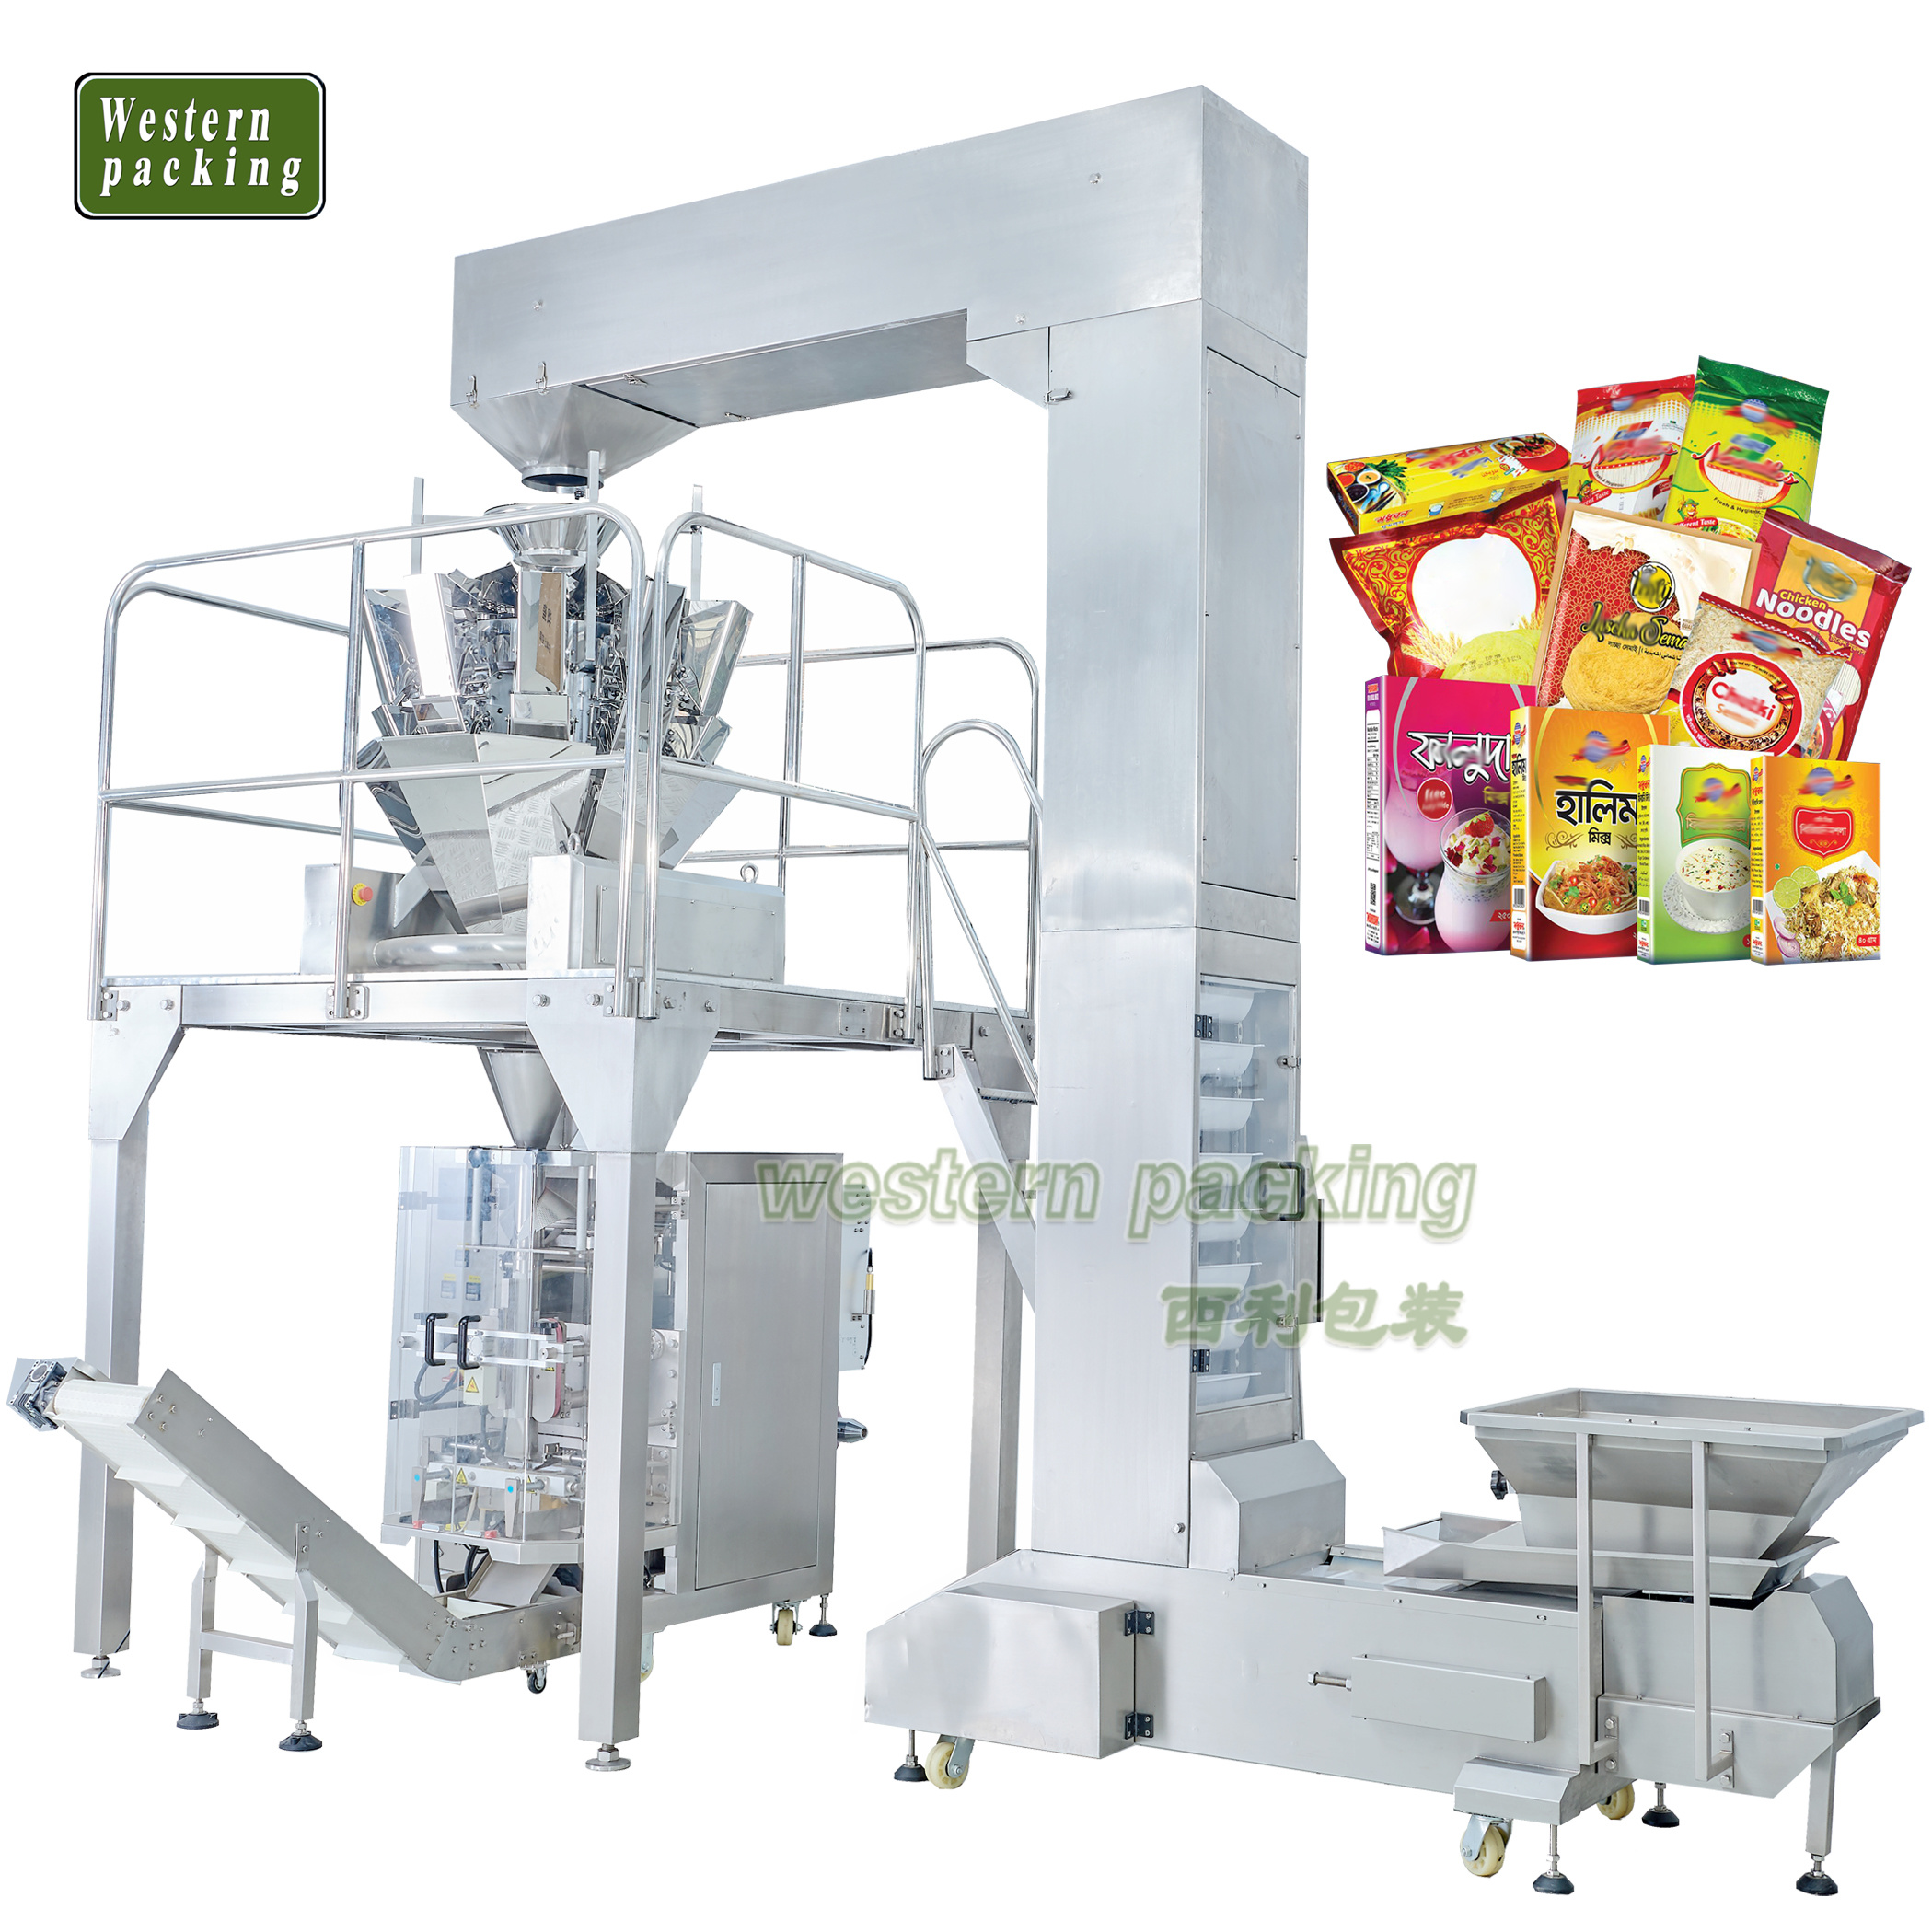 Bag Packaging Machines: A Comprehensive Guide